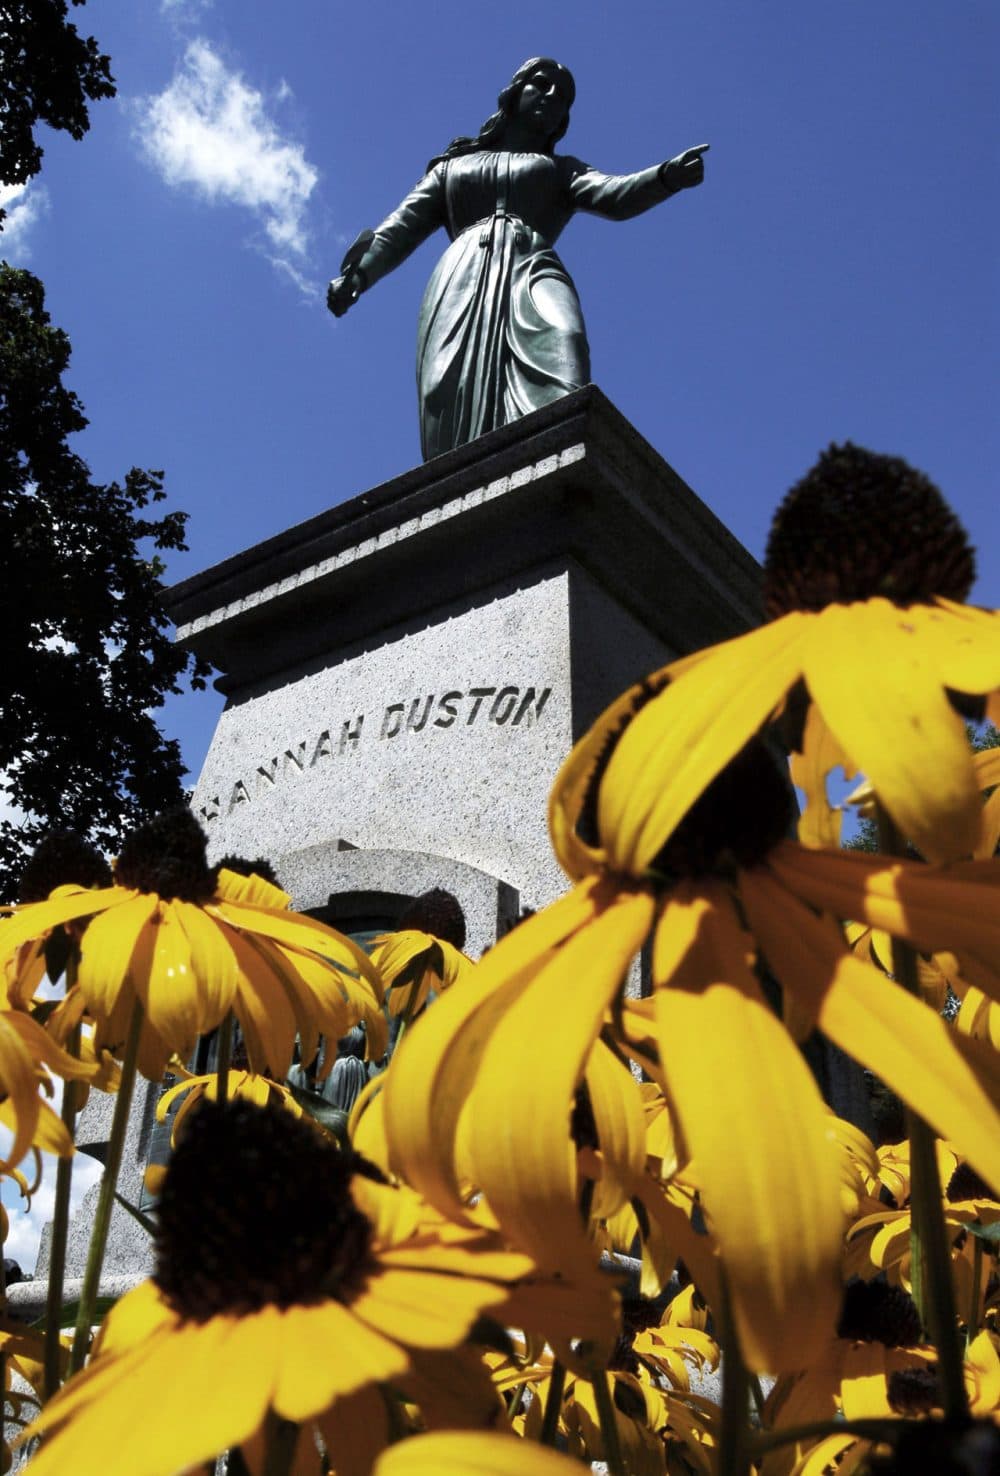 A statue of Hannah Dustin is pictured in Haverhill, Massachusetts. (William B. Plowman/AP)